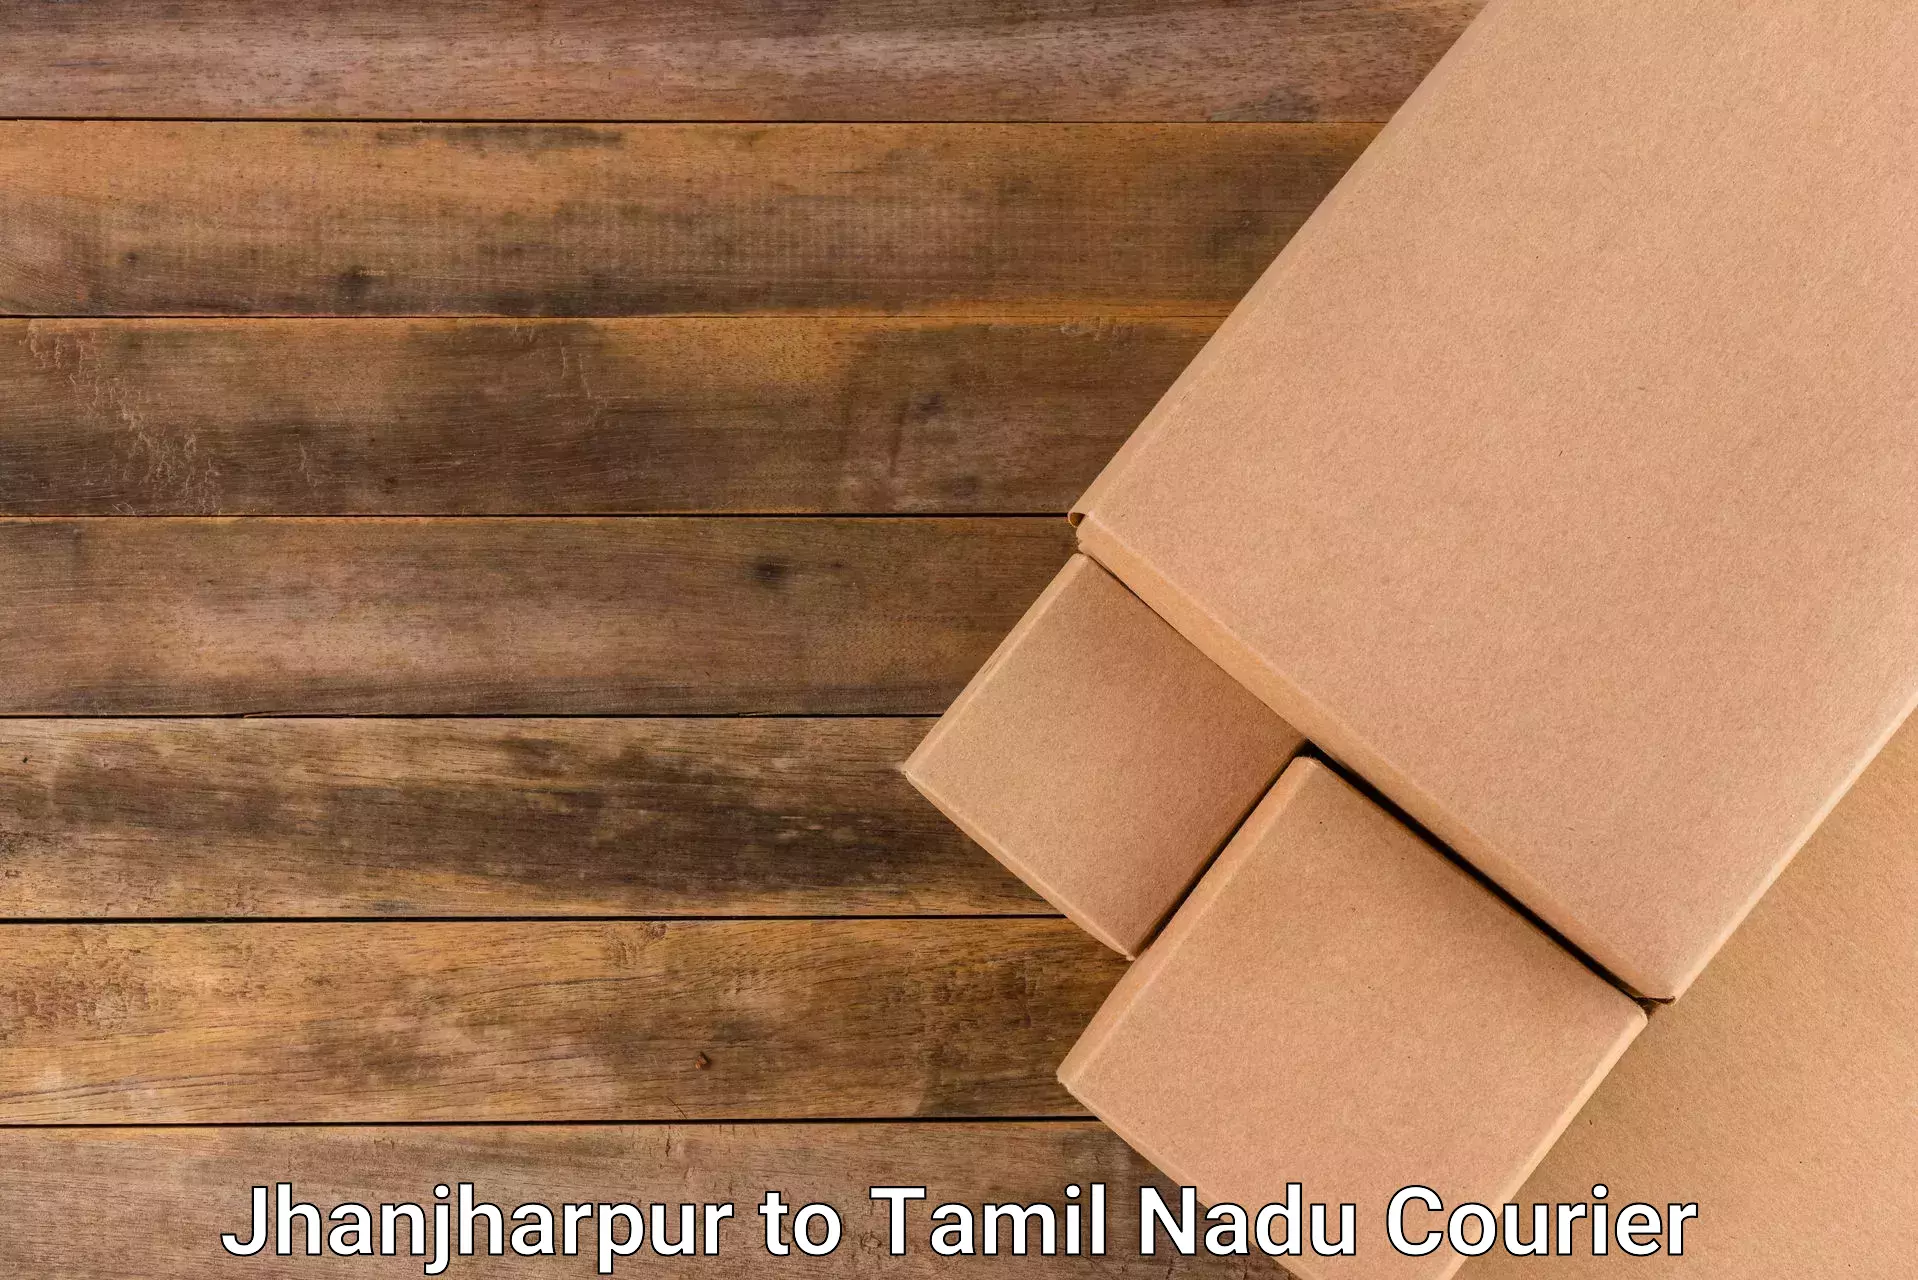 Courier membership Jhanjharpur to SRM Institute of Science and Technology Chennai